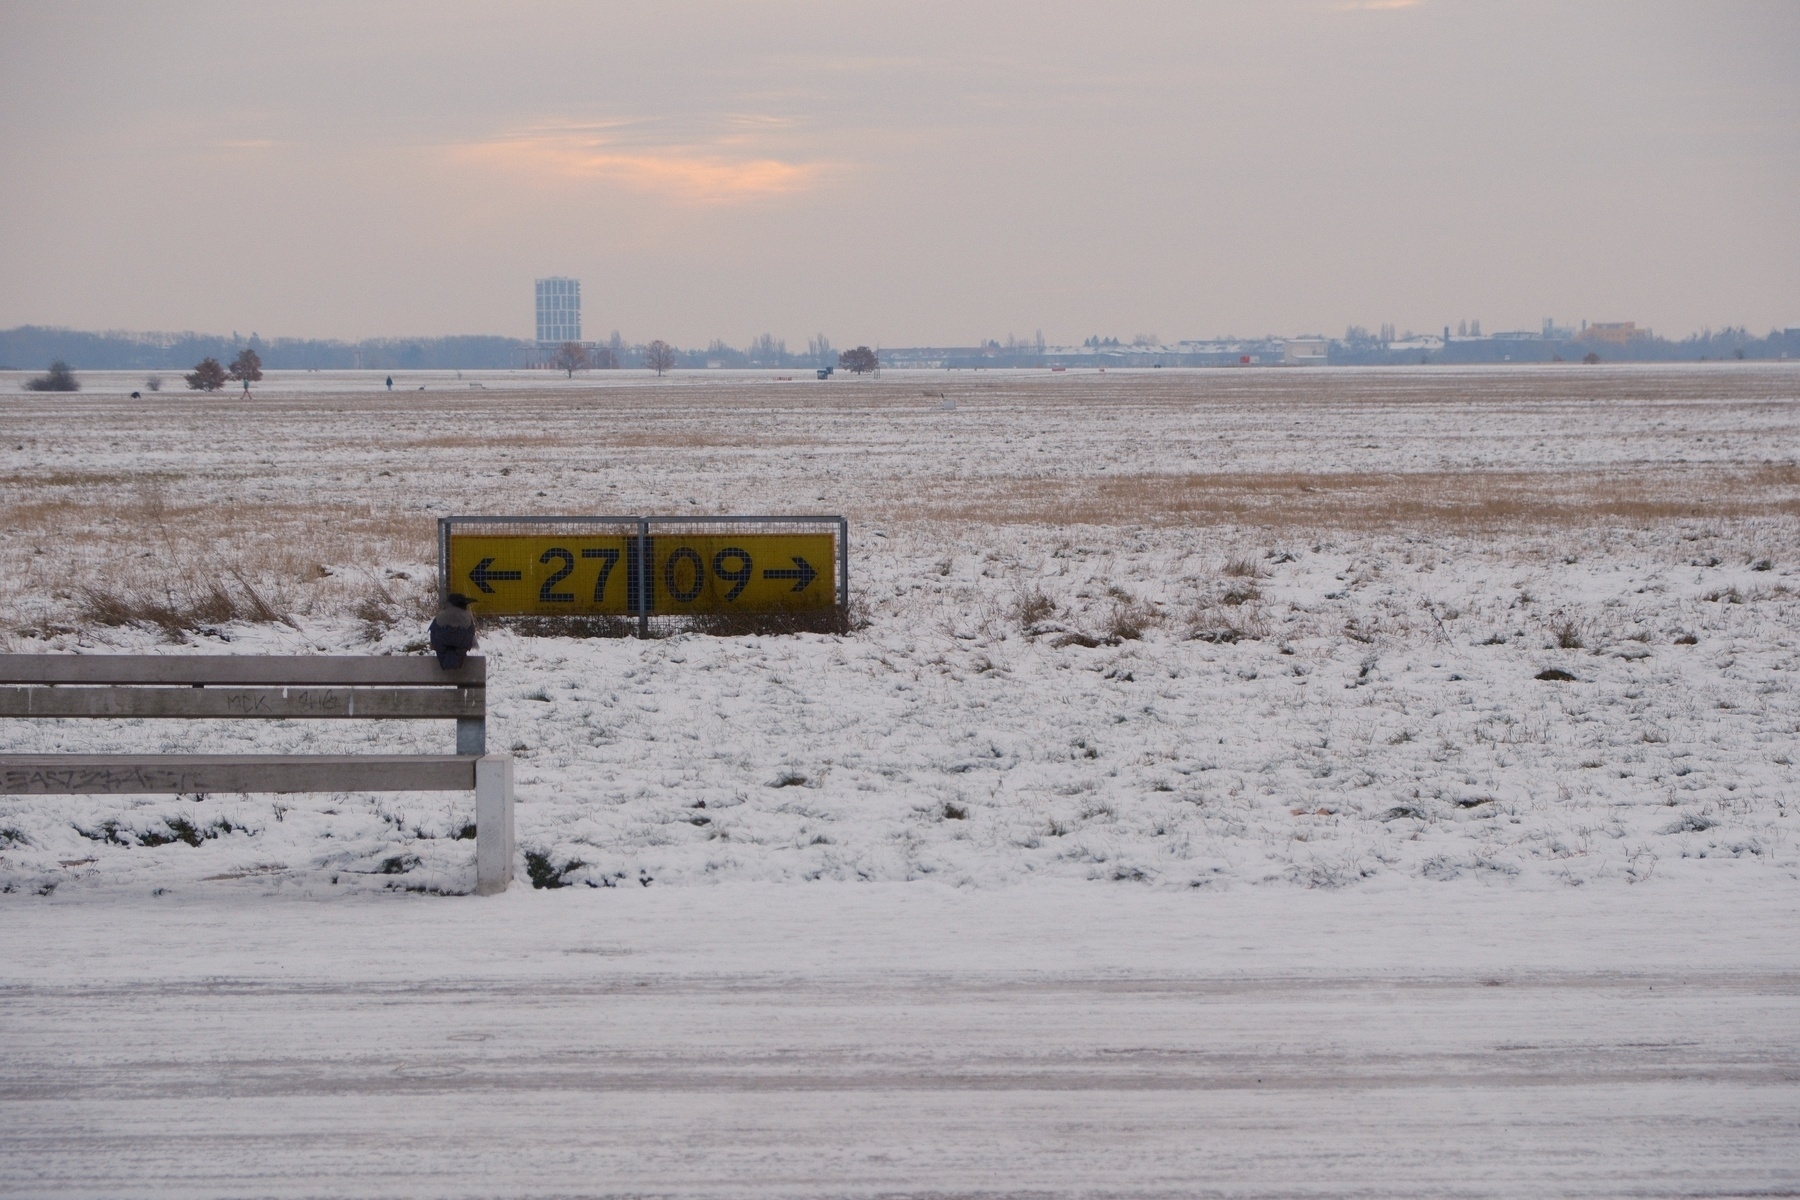 A snowy landscape with runway direction signs reading “27” with an arrow pointing left and “09” with an arrow pointing right, indicating runway headings at an airport. The background features a flat horizon with the sun trying to shine through an overcast sky and distant buildings. There’s a crow sitting on a bench in the foreground.